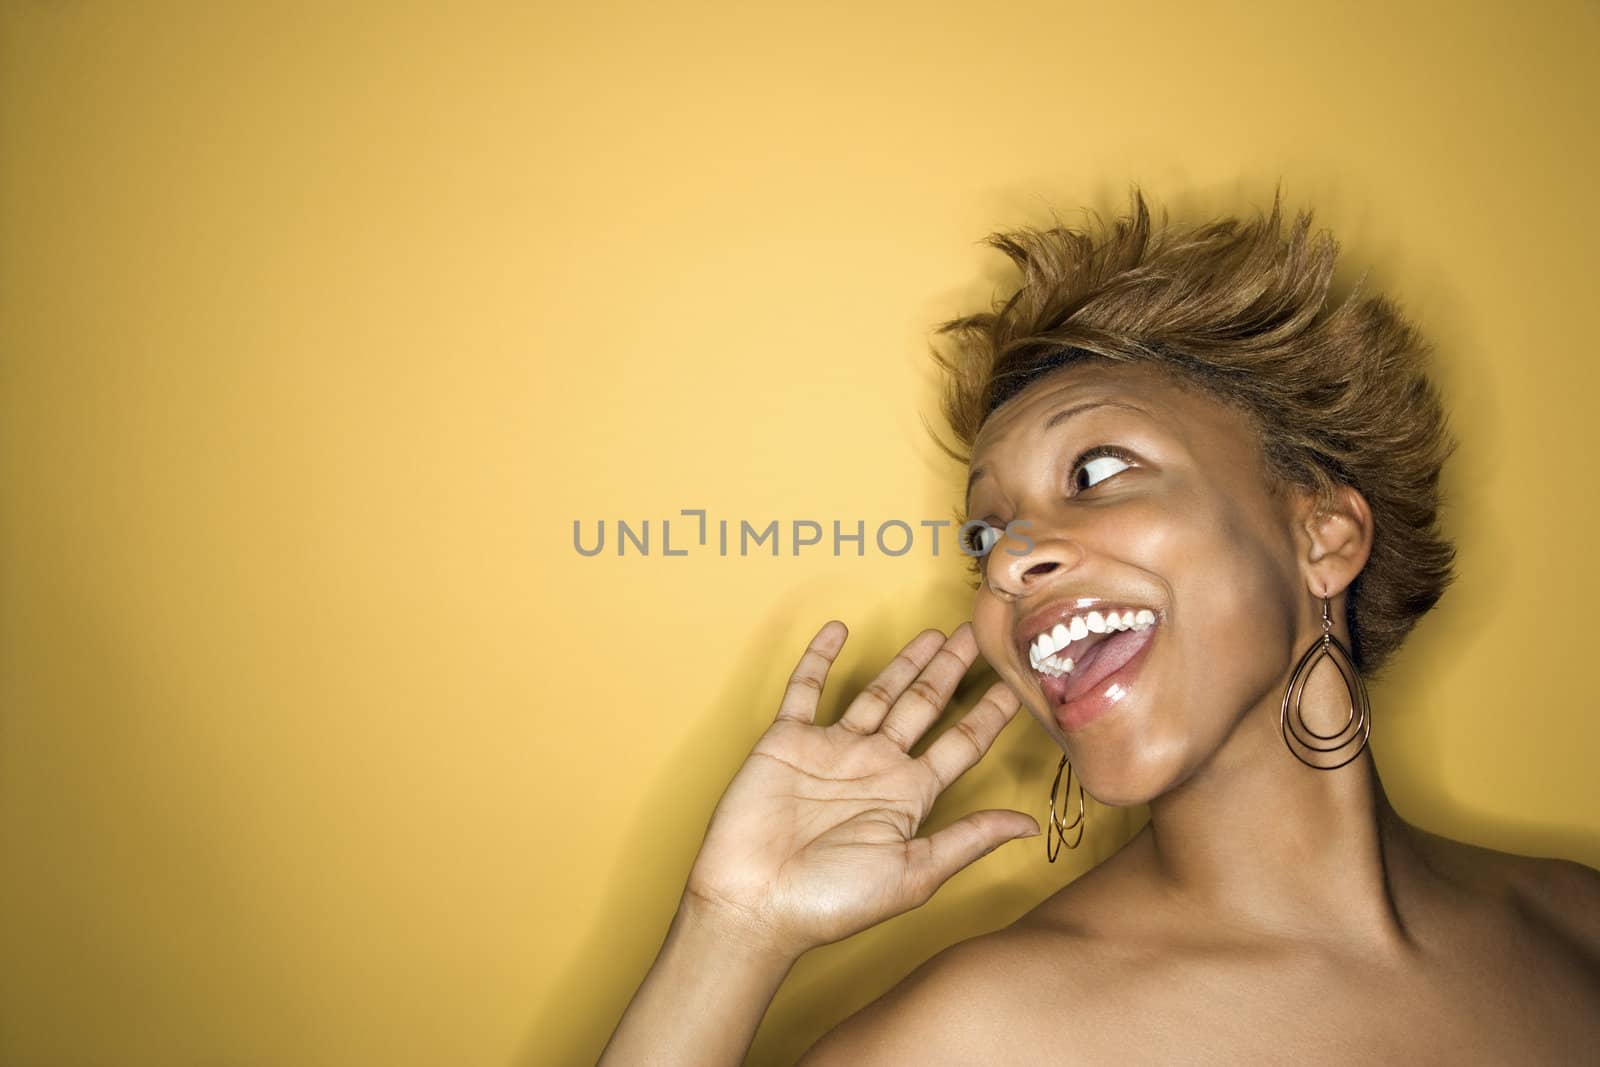 Portrait of young African-American woman on yellow background yelling and smiling at someone.